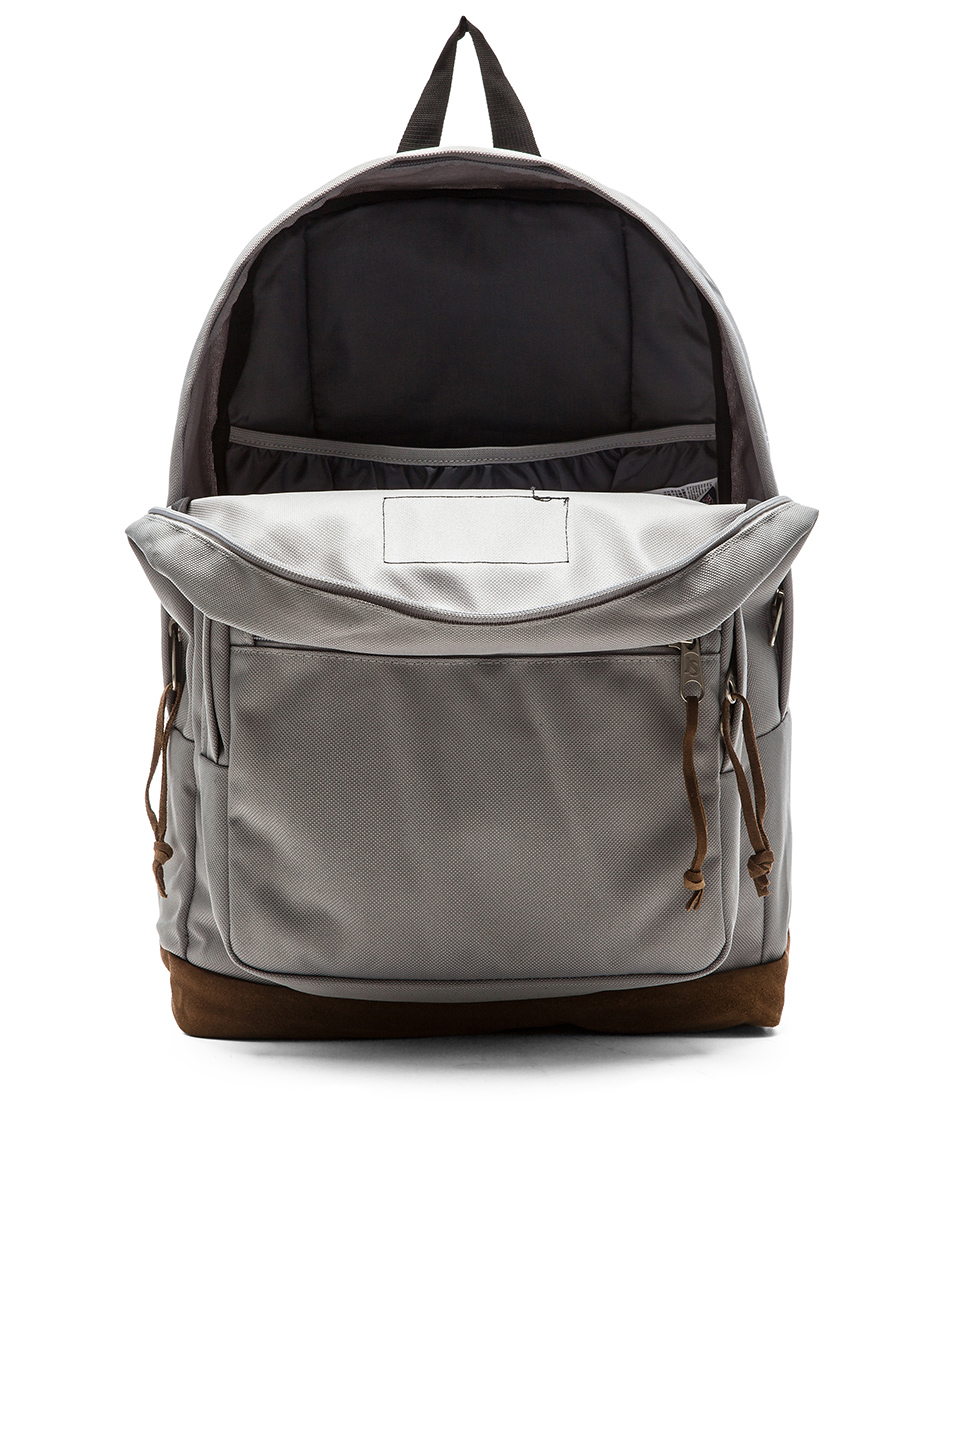 Lyst - Jansport Right Pack in Gray